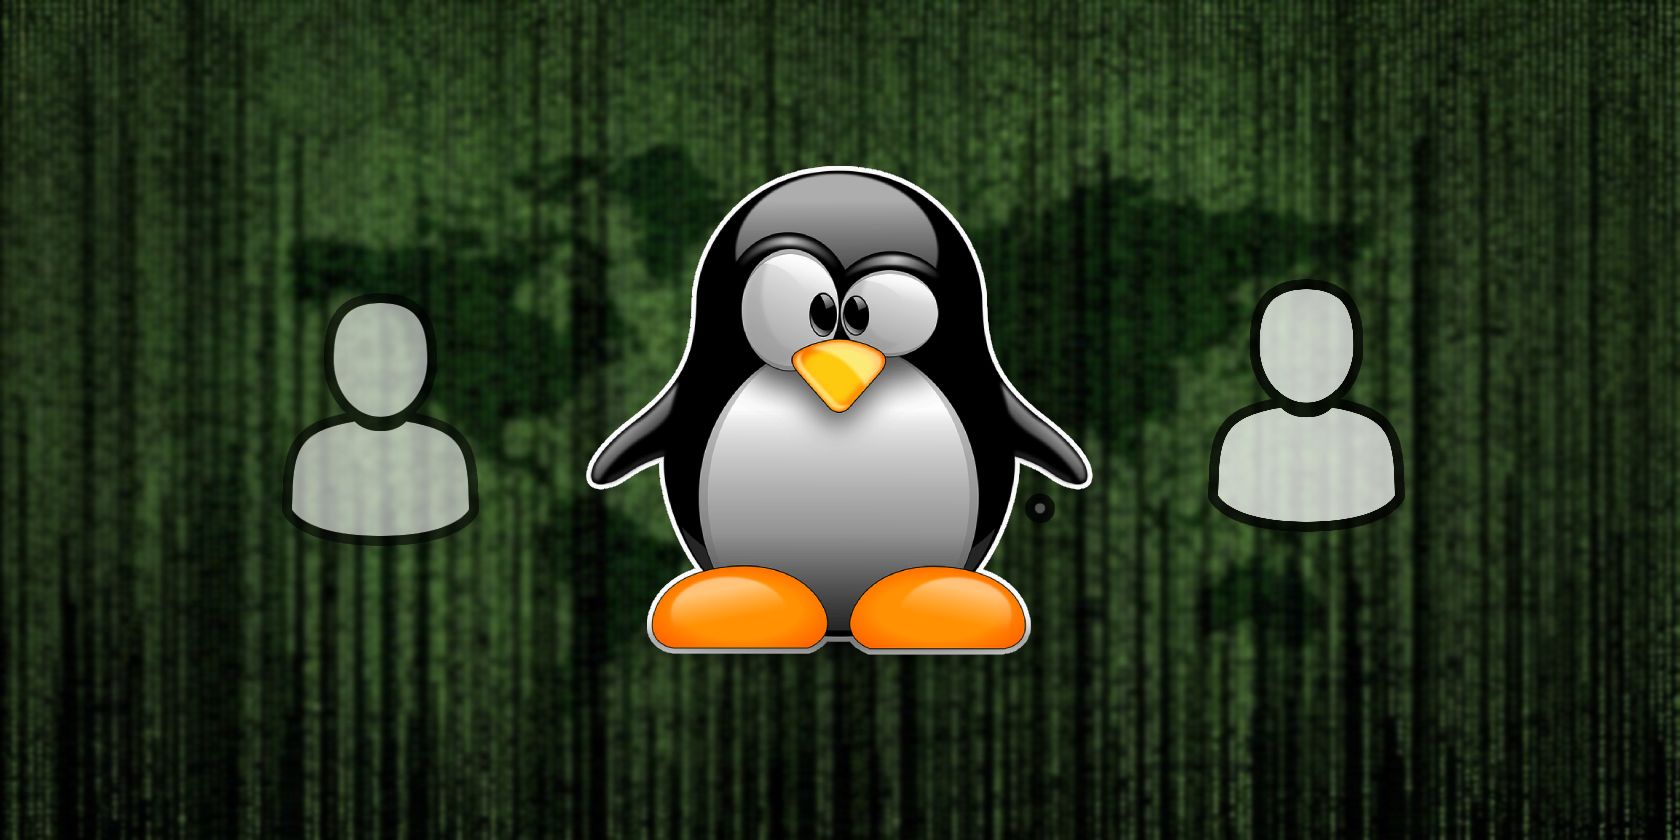 The Complete Guide to User Management in Linux